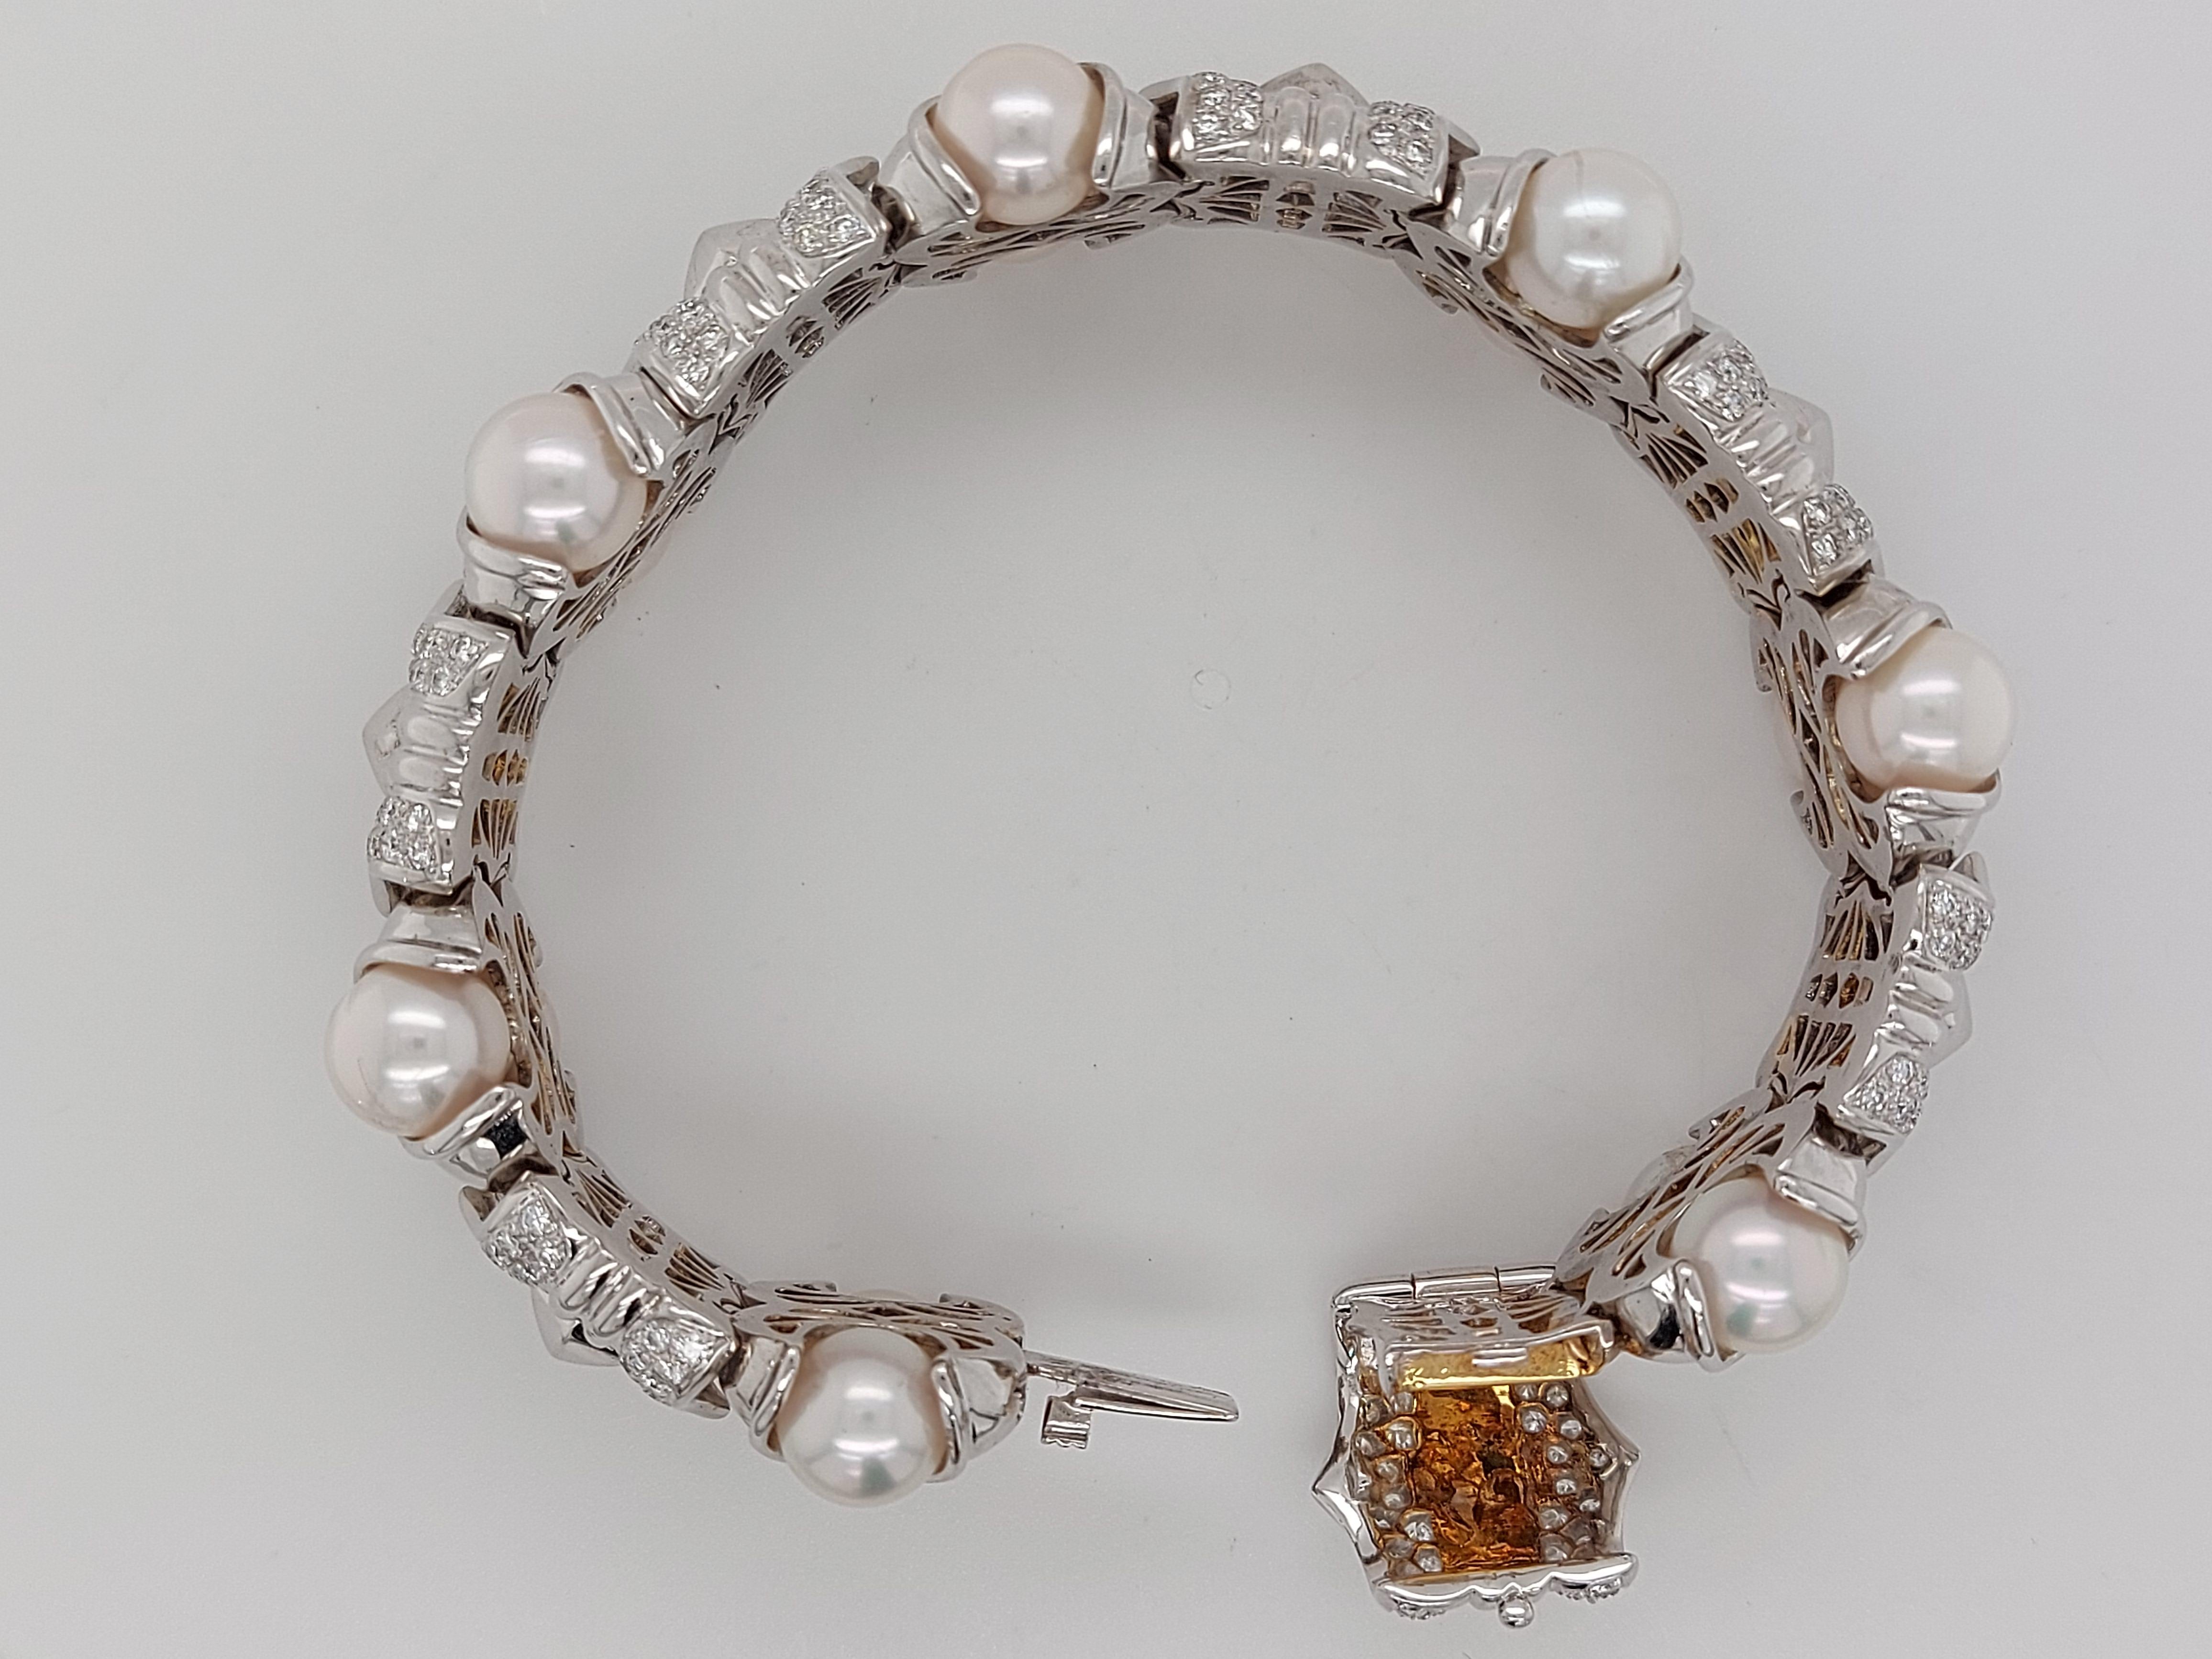 18 Karat White Gold Bracelet with Brilliant Cut Diamonds and Pearls For Sale 8